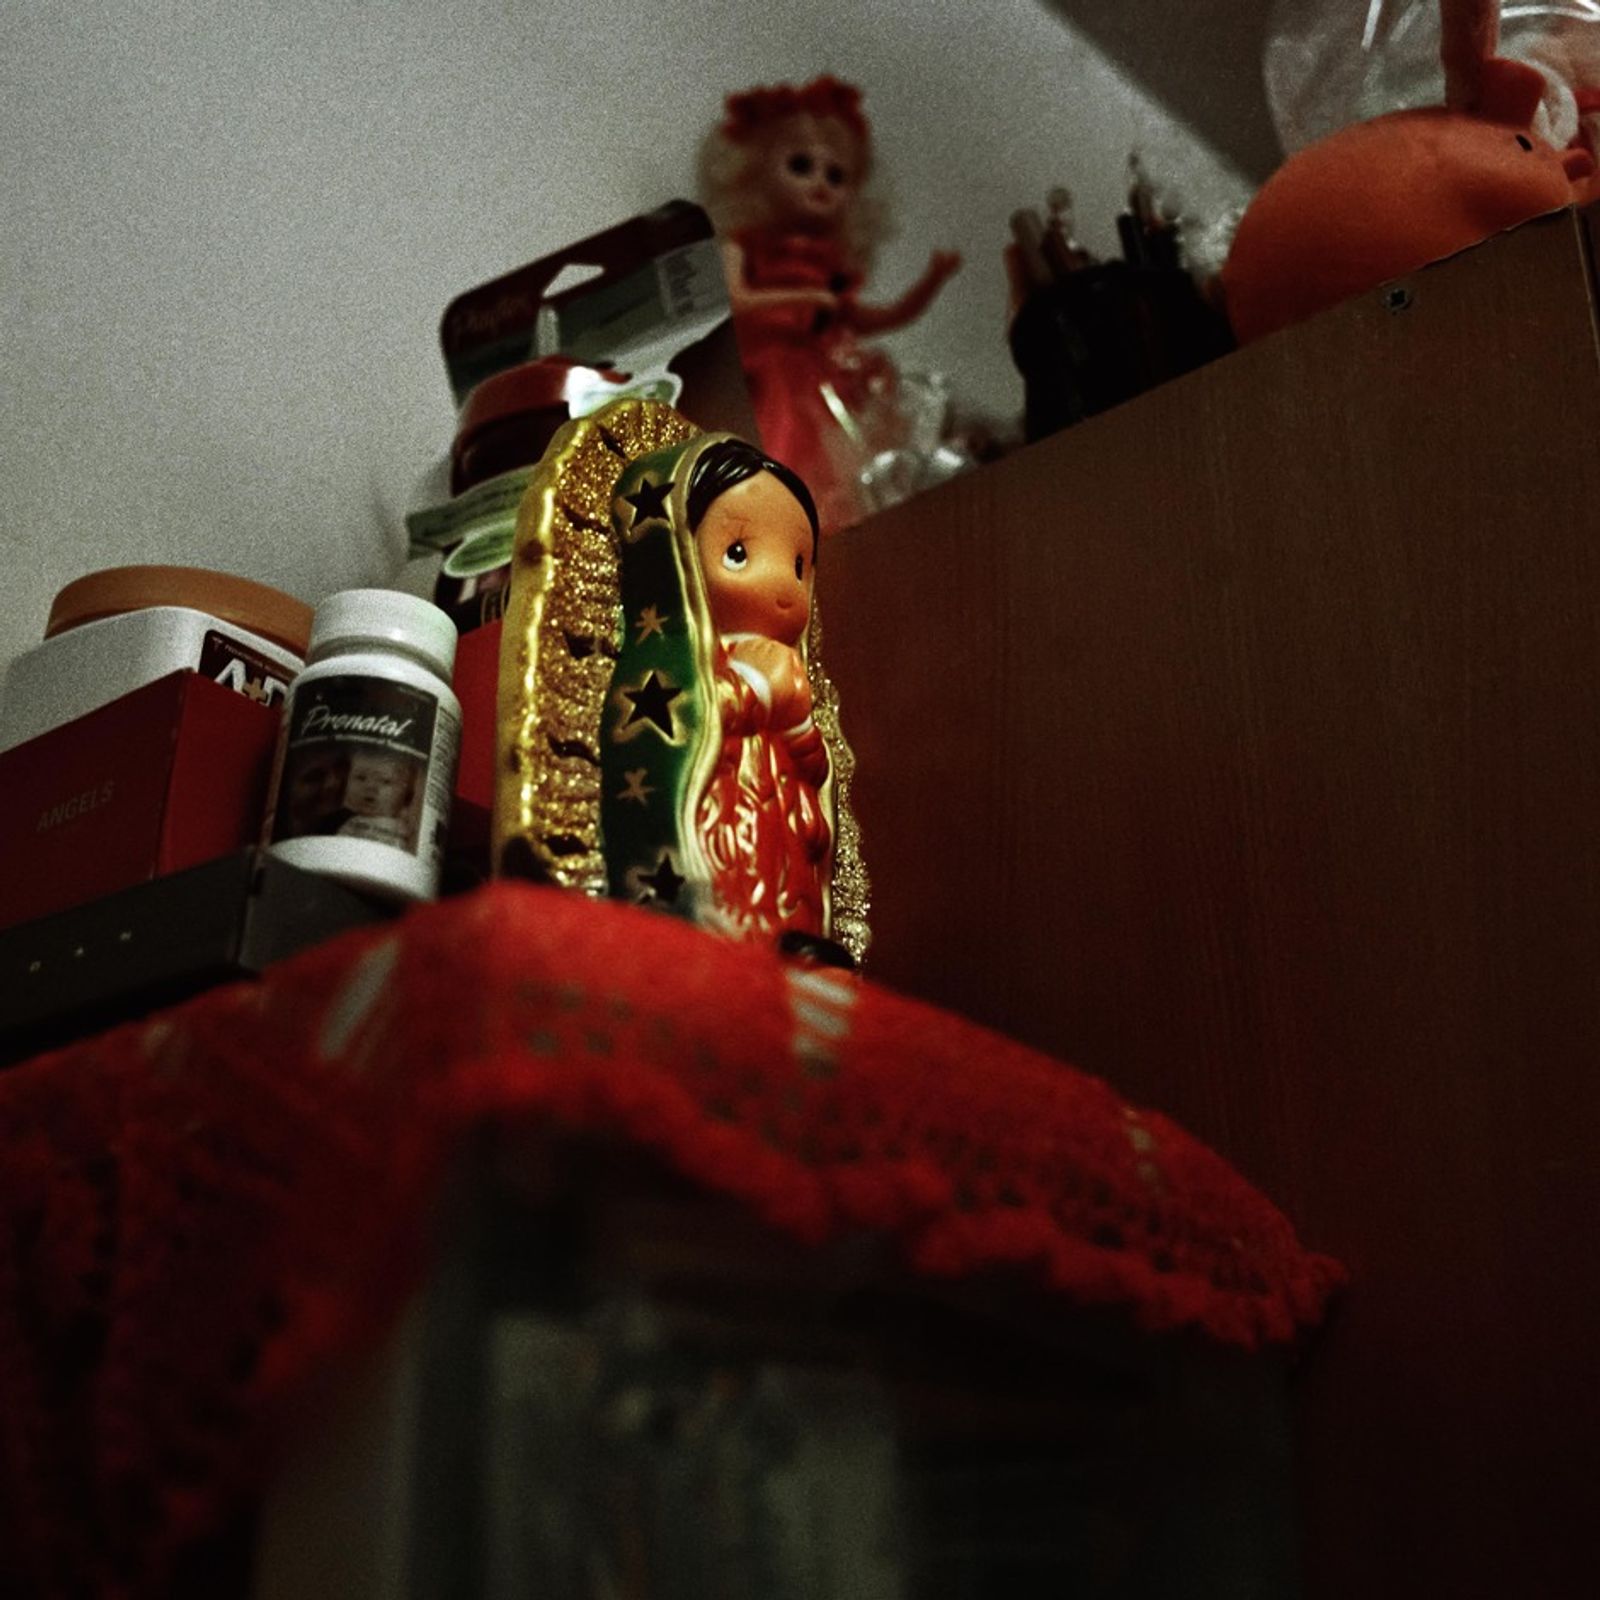 © Ruth Prieto - A Virgin of Guadalupe´s toy on the shelve. In the background a Barbie figure stands along with all the other toys.